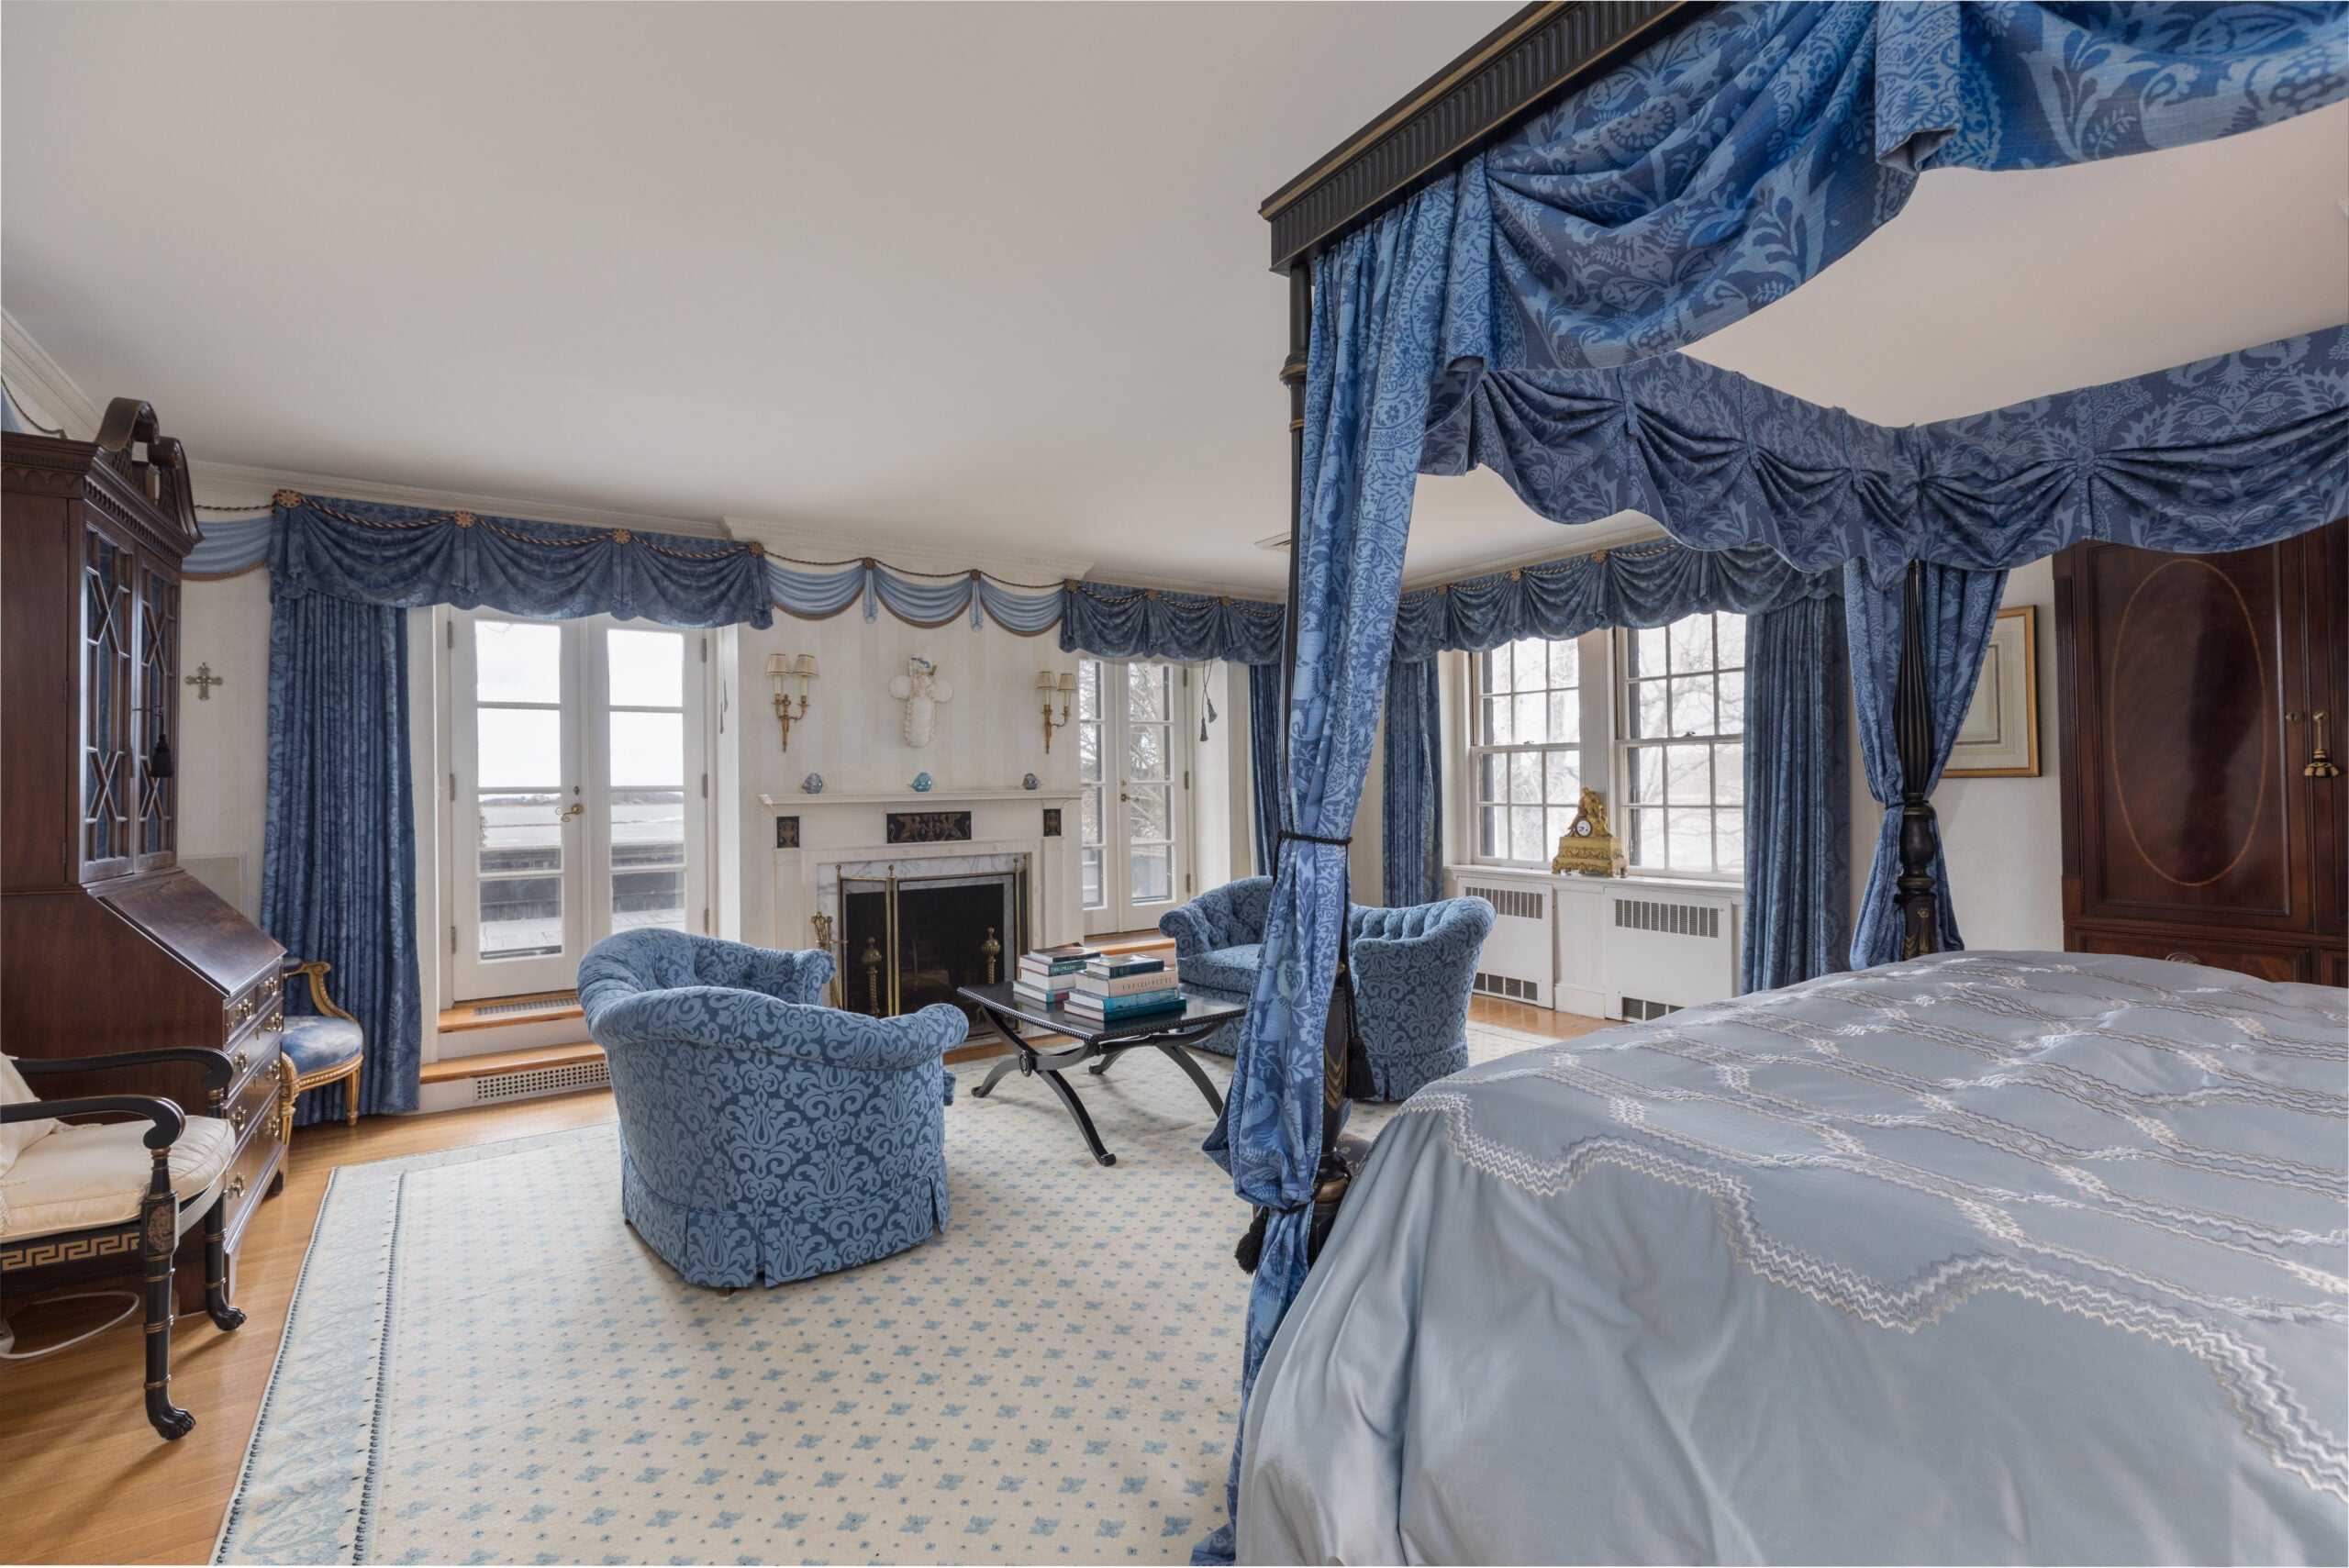 A primary bedroom suite lined with short blue curtains and French doors. A canopy bed sits in the middle with blue drapes. Matching arm chairs are set before the fireplace in this room with light carpeting.